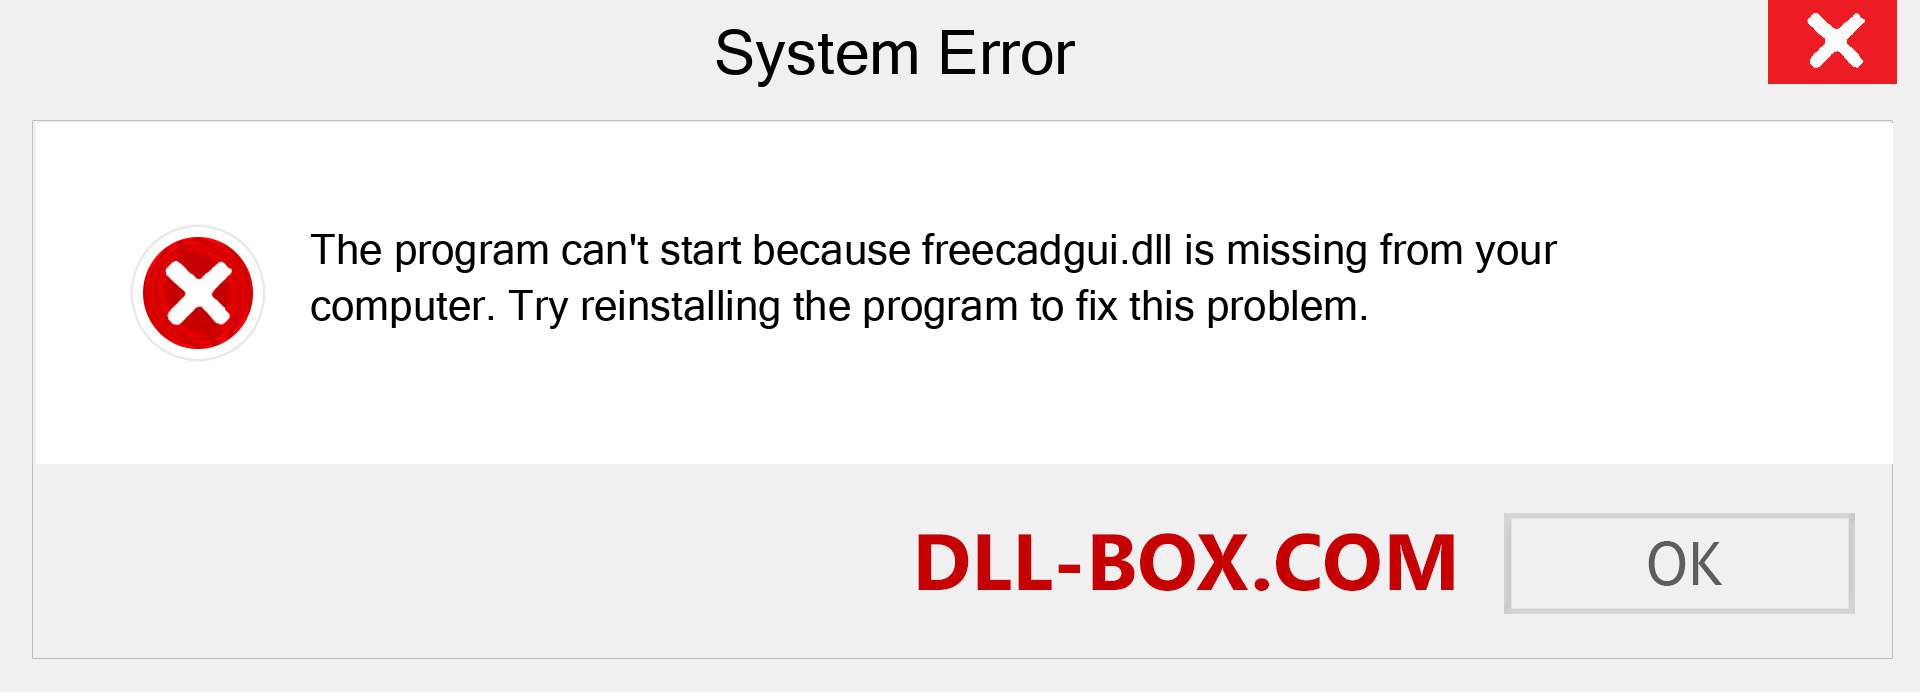  freecadgui.dll file is missing?. Download for Windows 7, 8, 10 - Fix  freecadgui dll Missing Error on Windows, photos, images